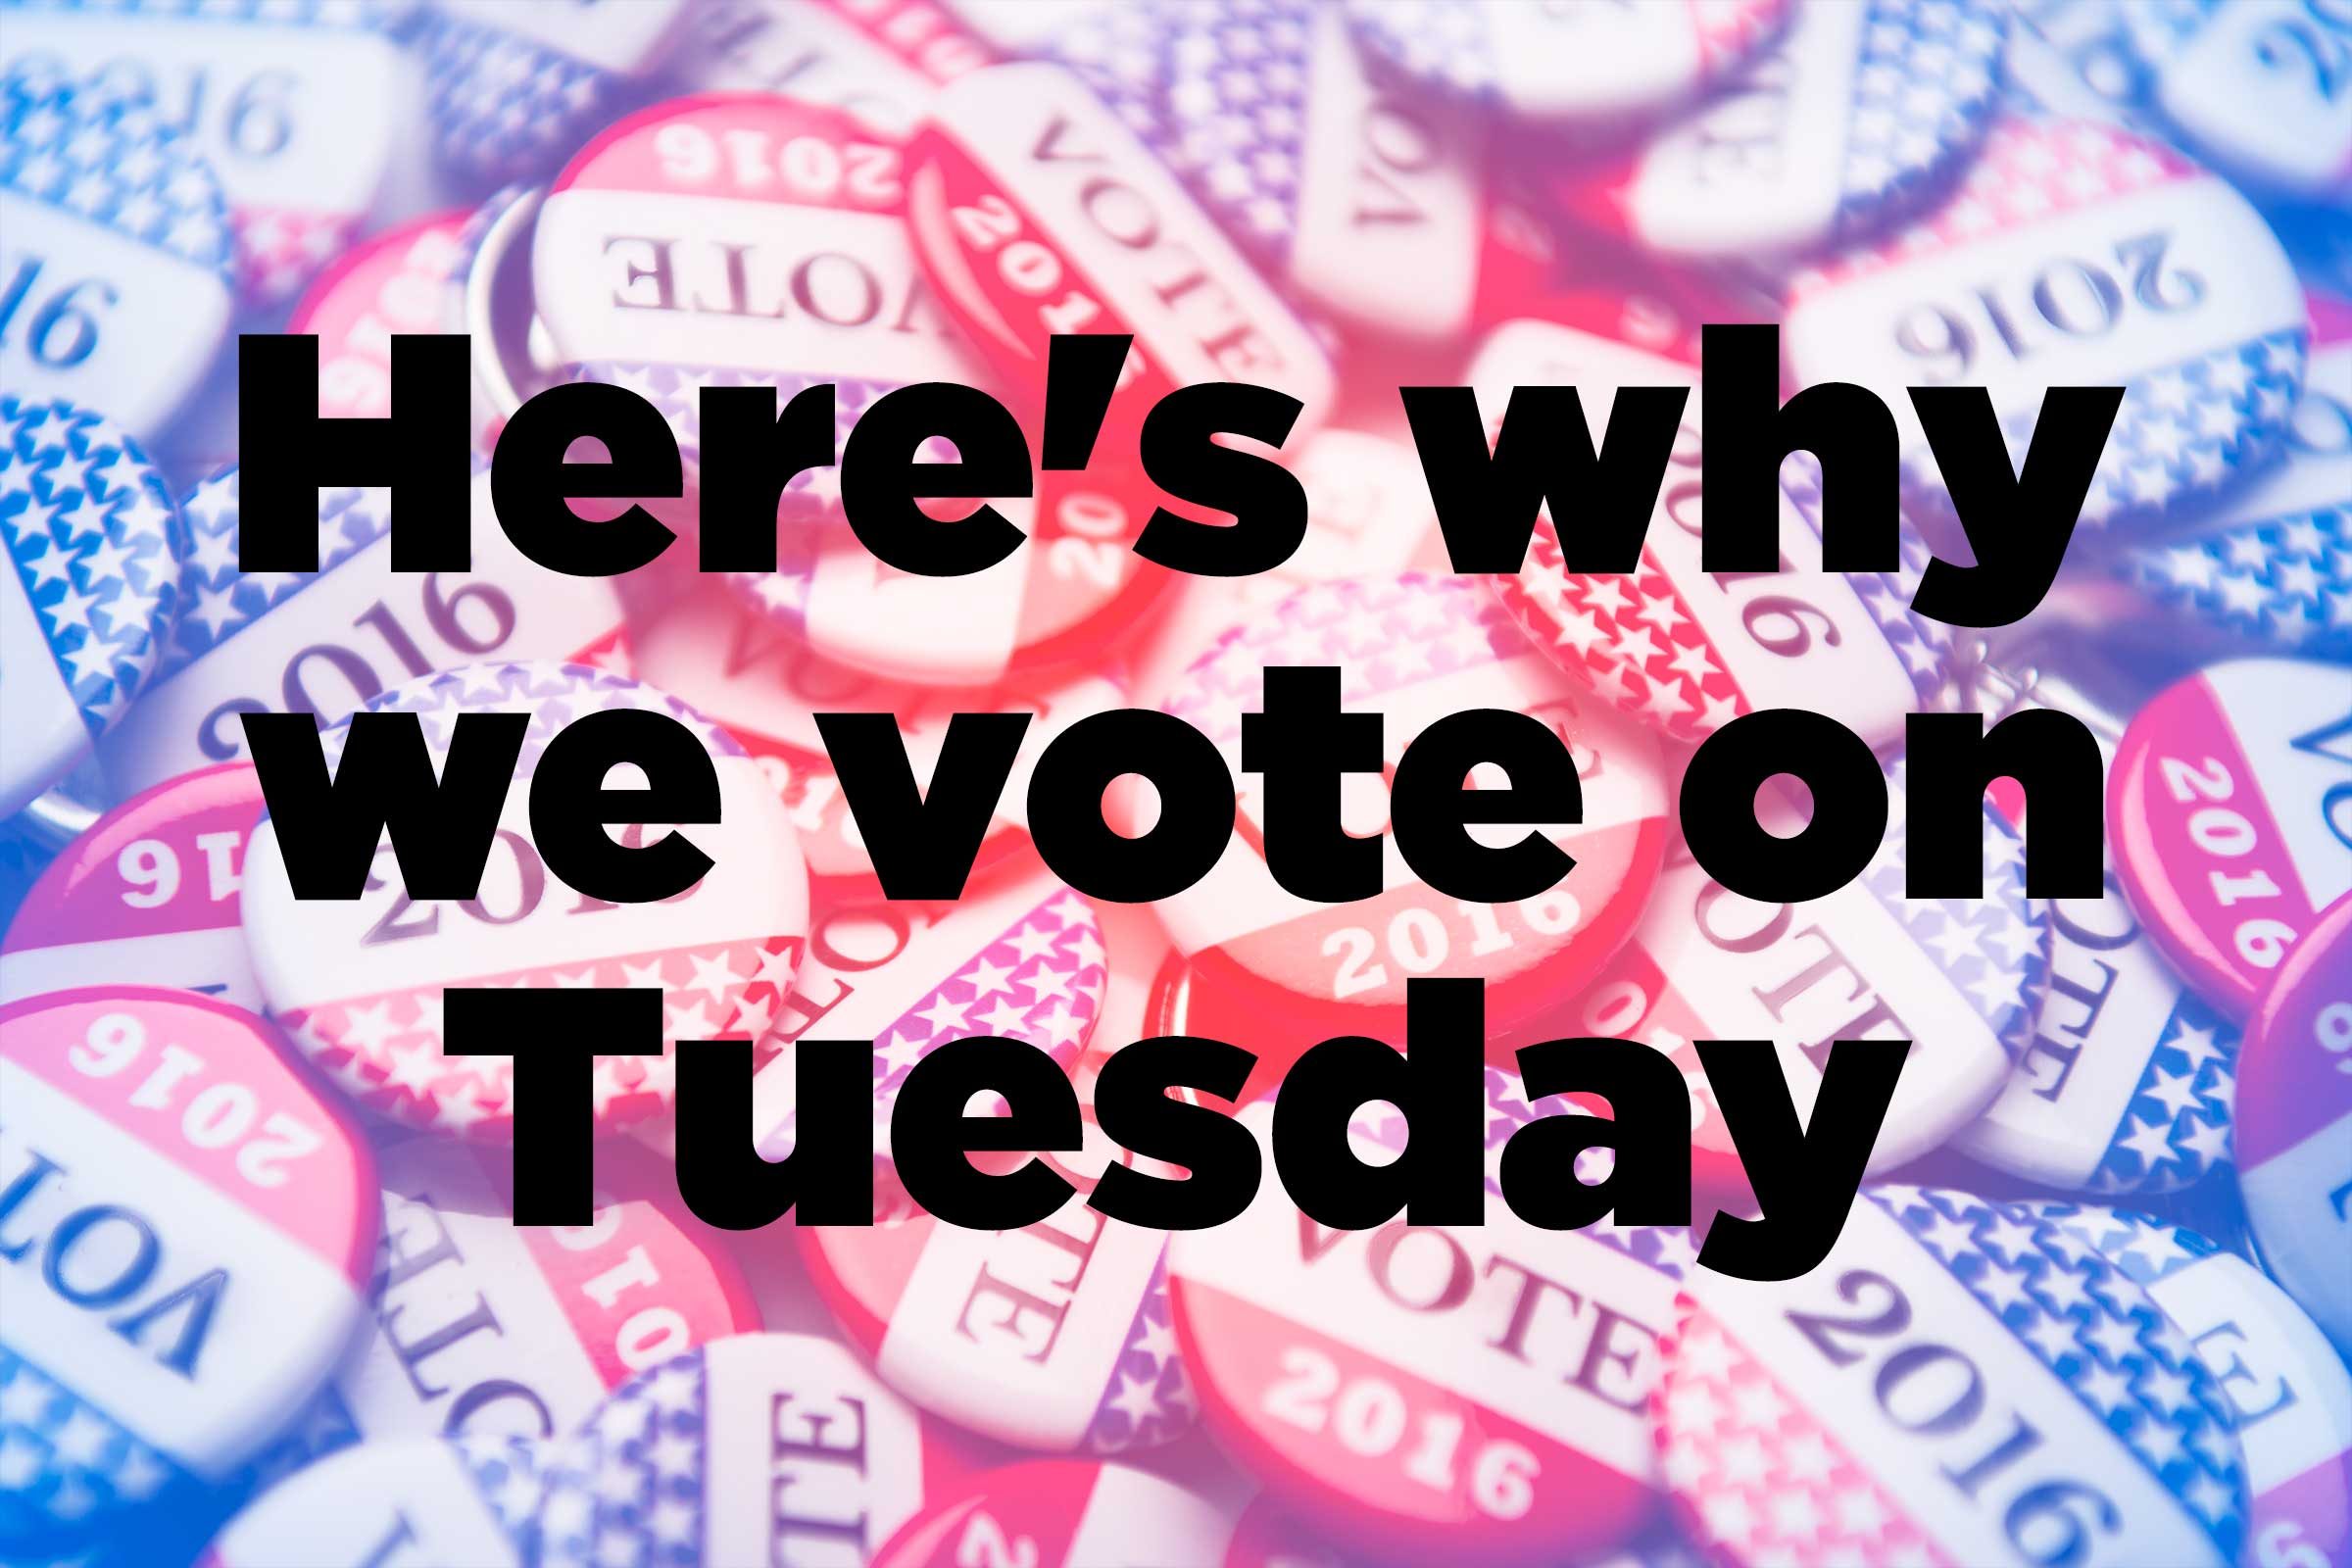 Here's Why We Vote on Tuesday in November Reader's Digest